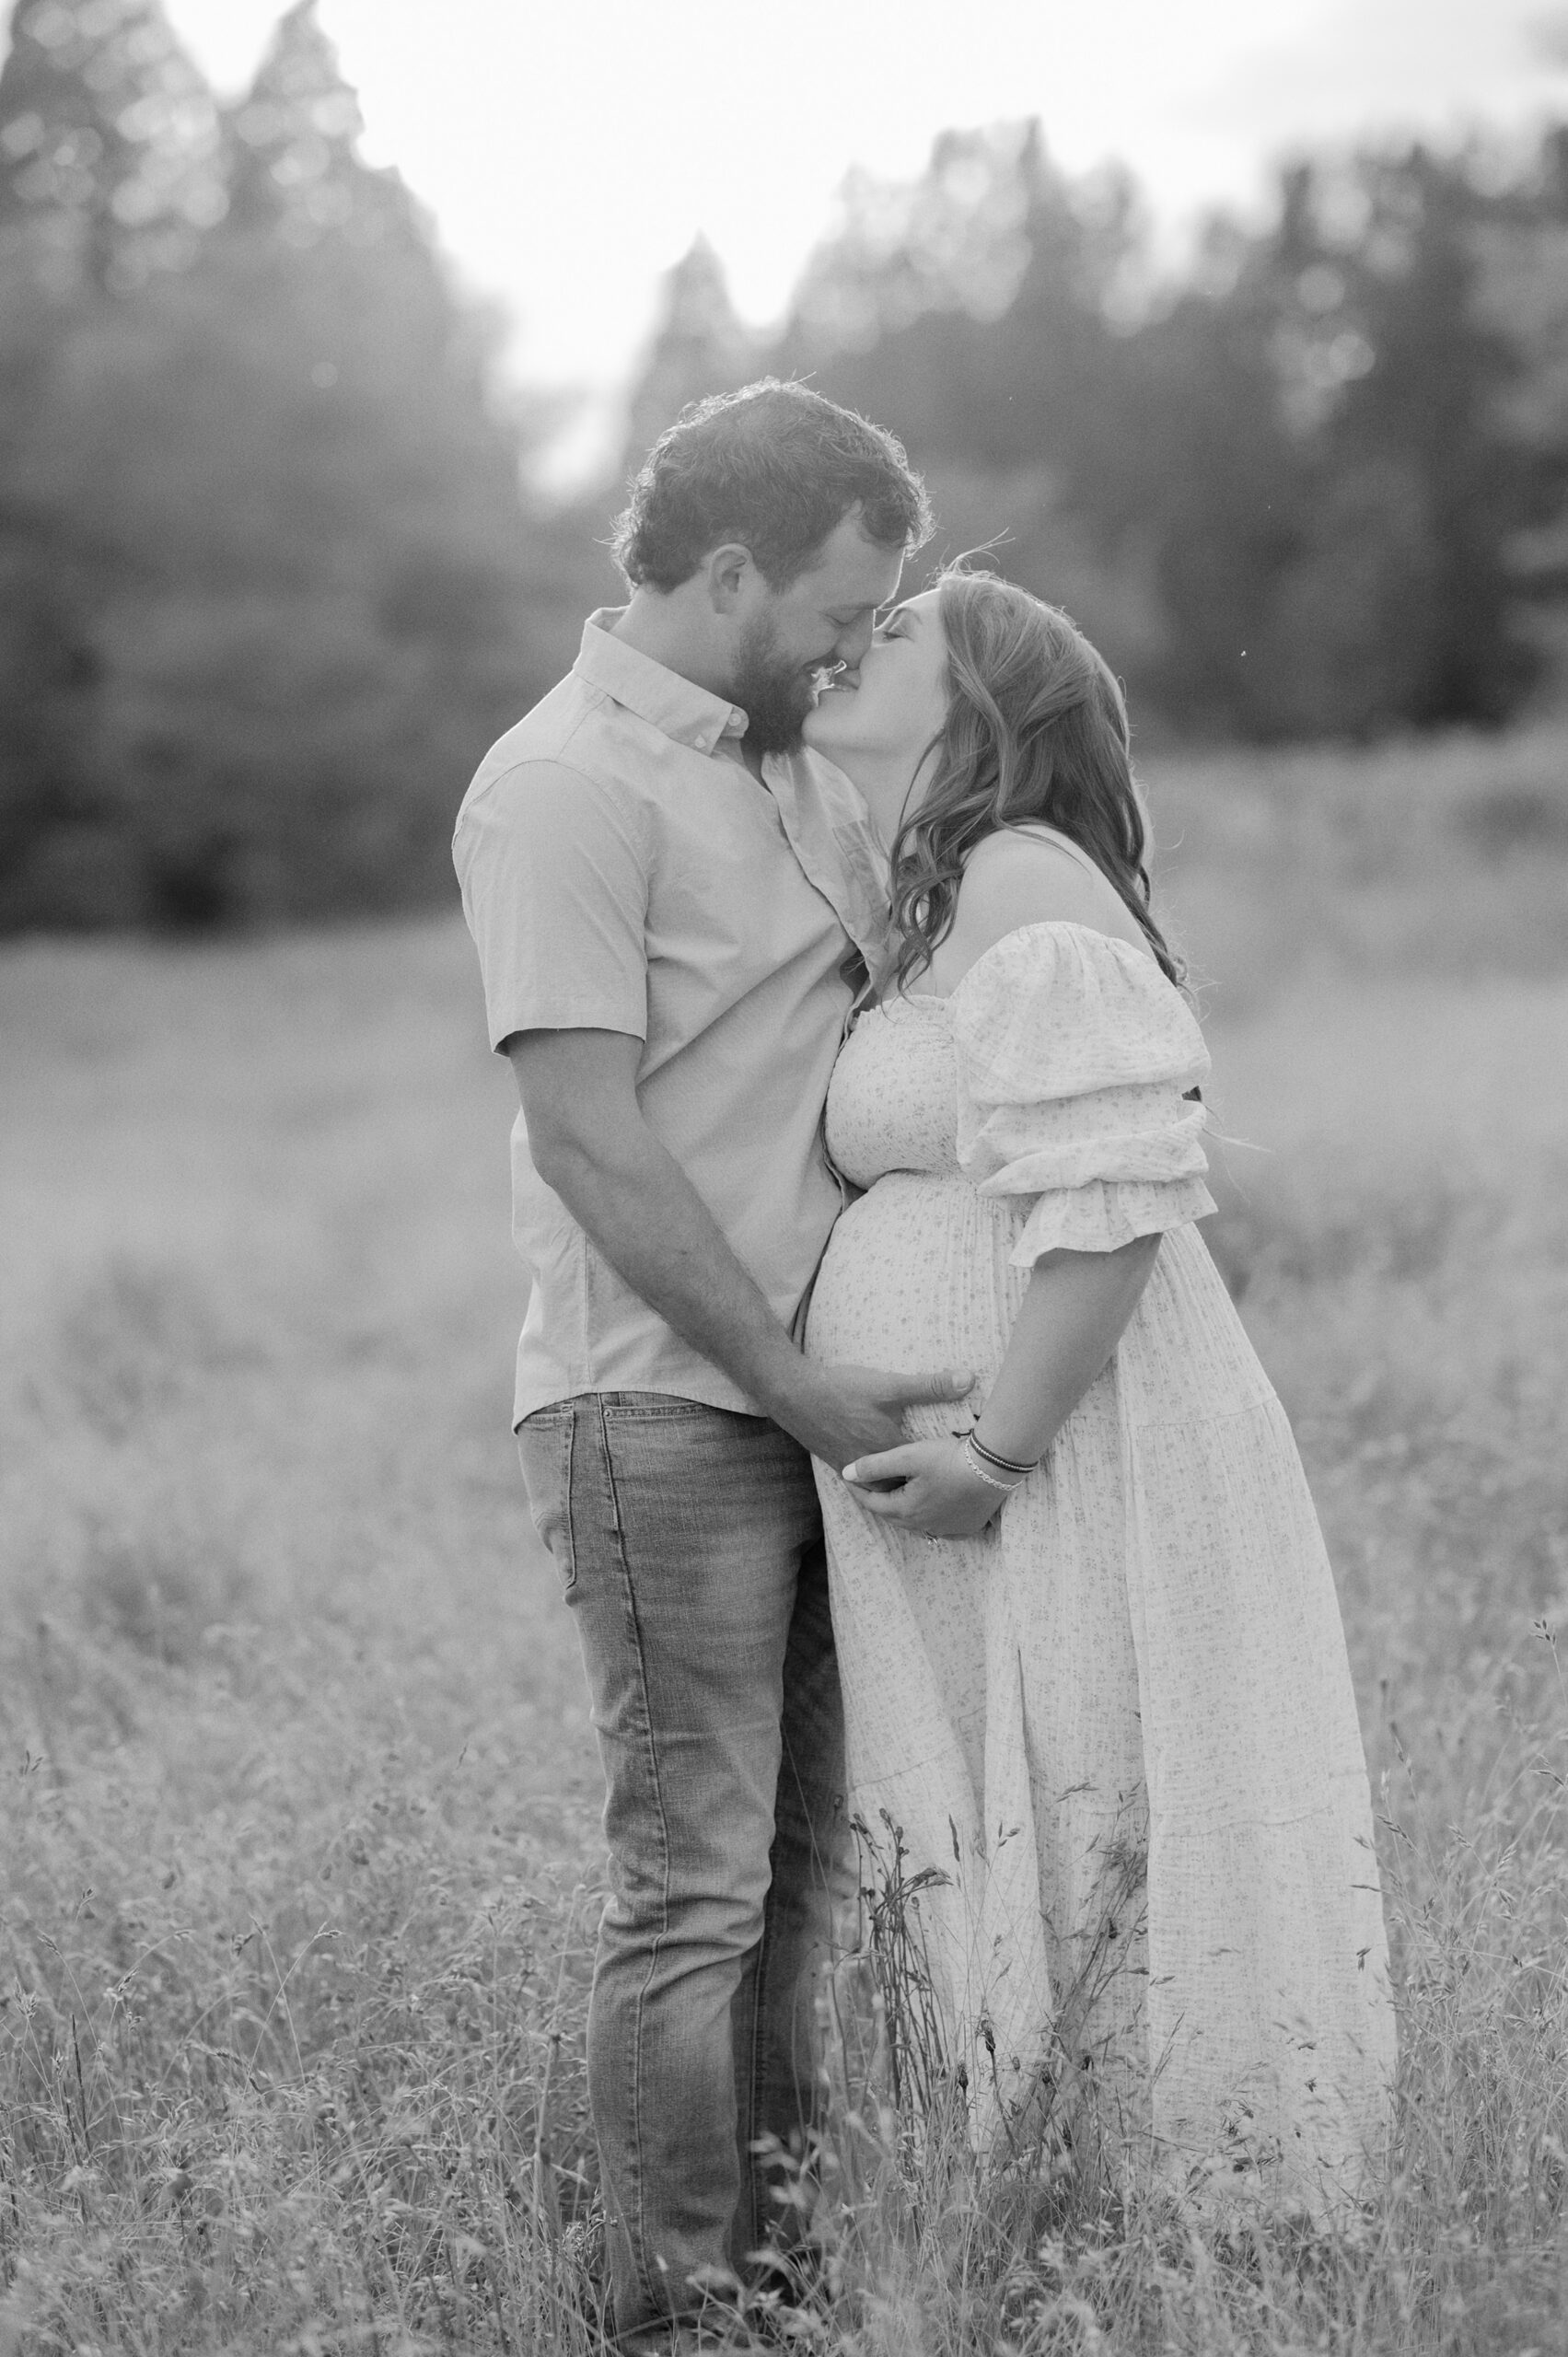 Parents to be kiss while holding the bump in a large open field of tall grass